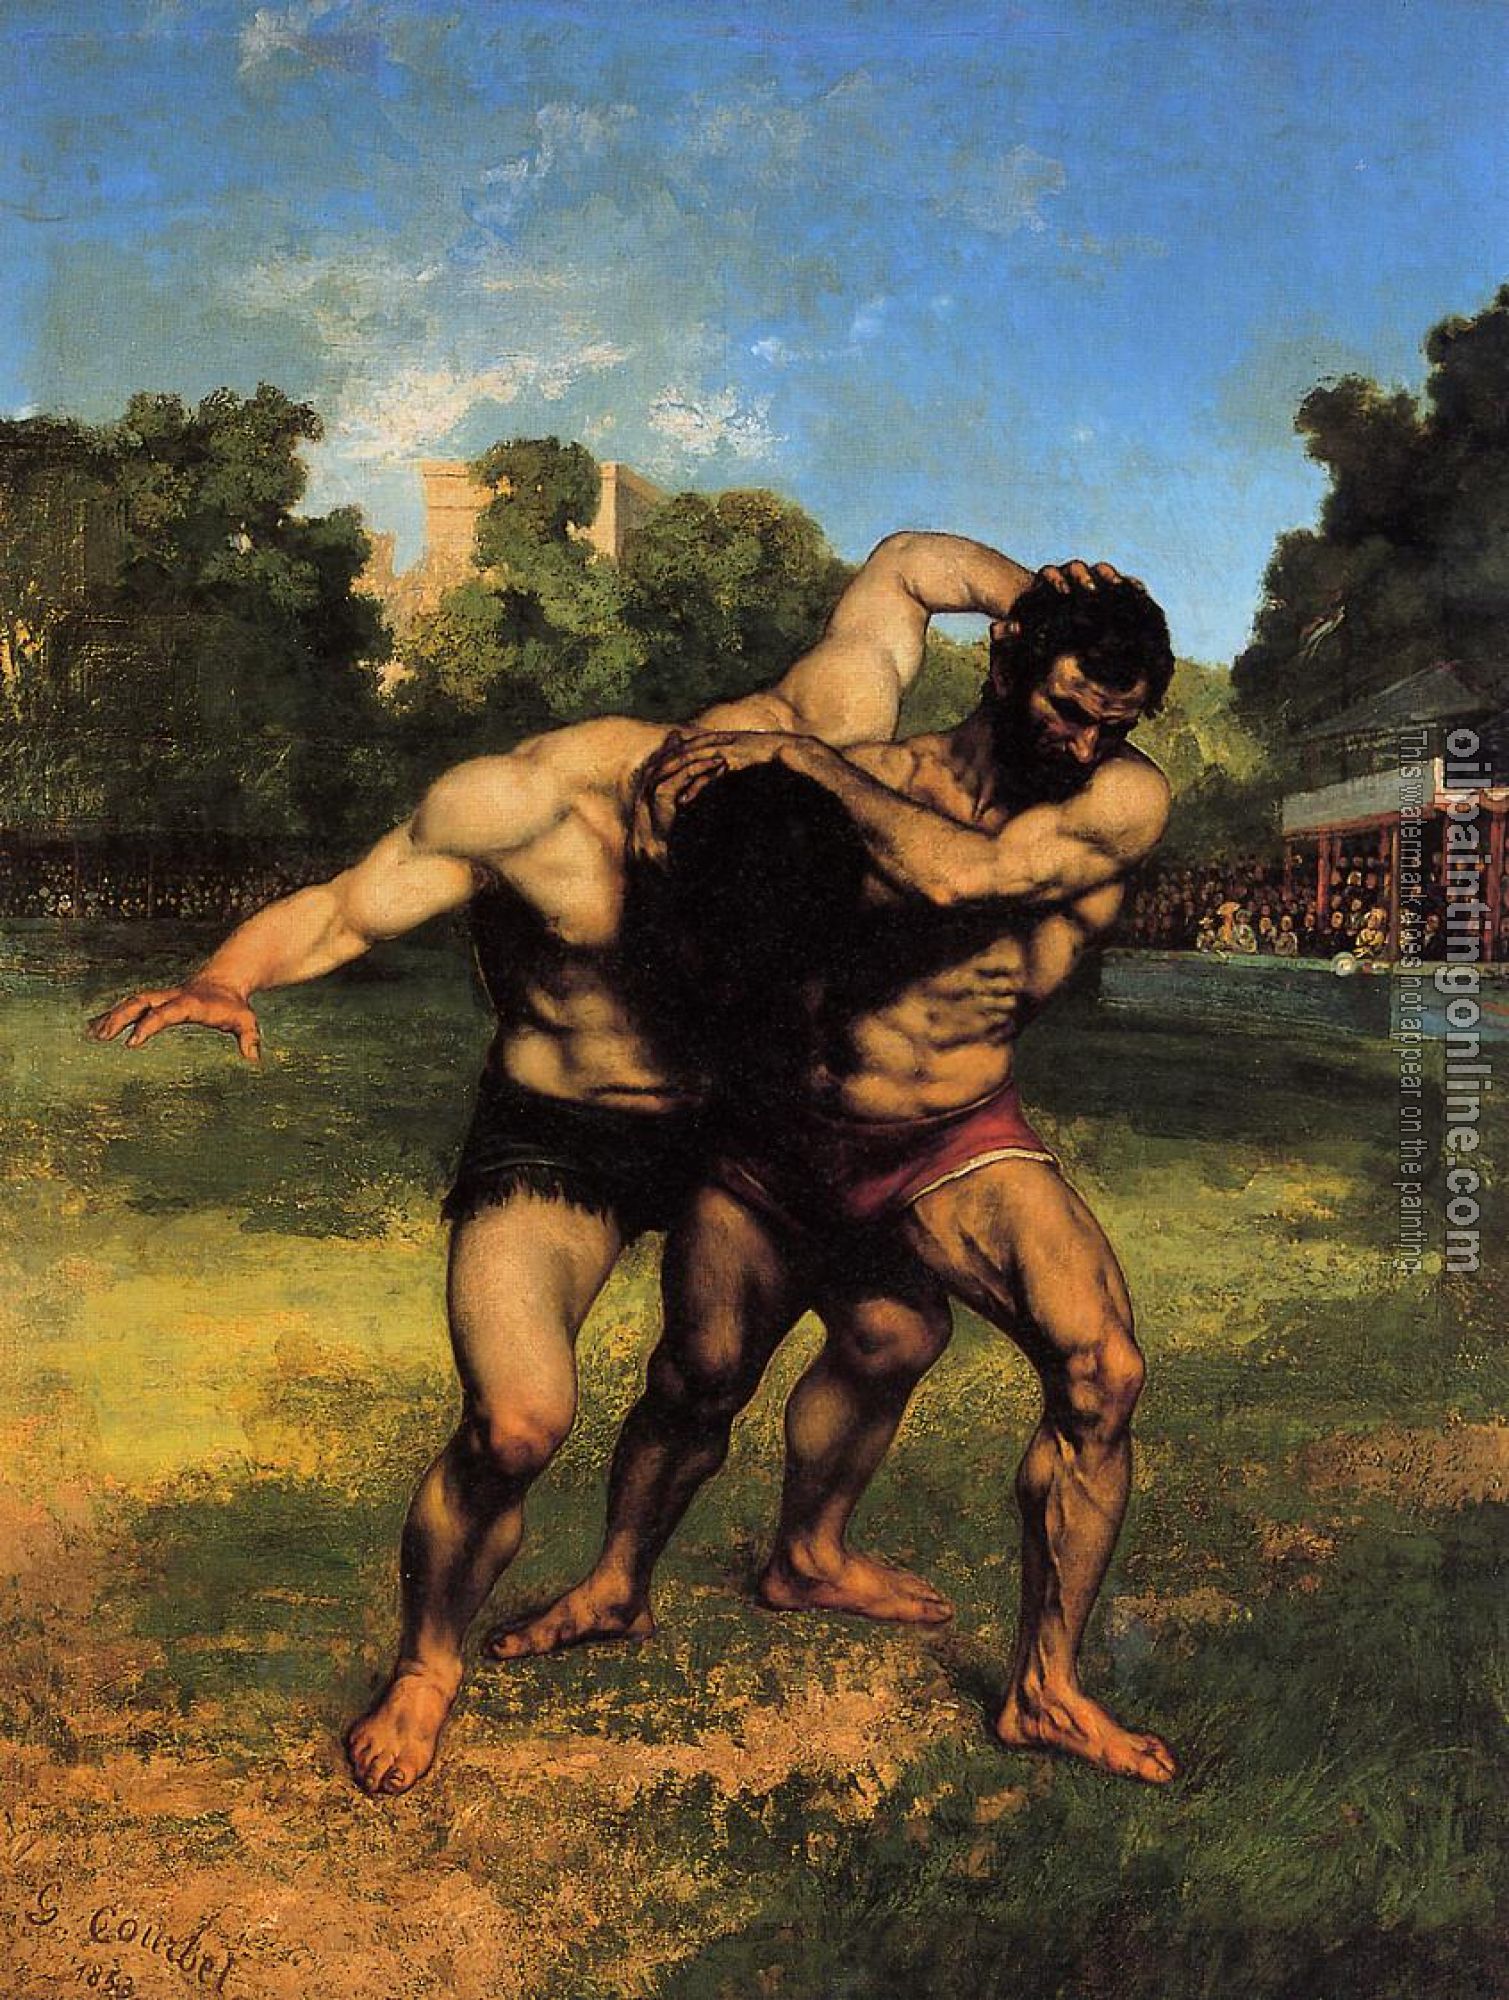 Courbet, Gustave - The Wrestlers